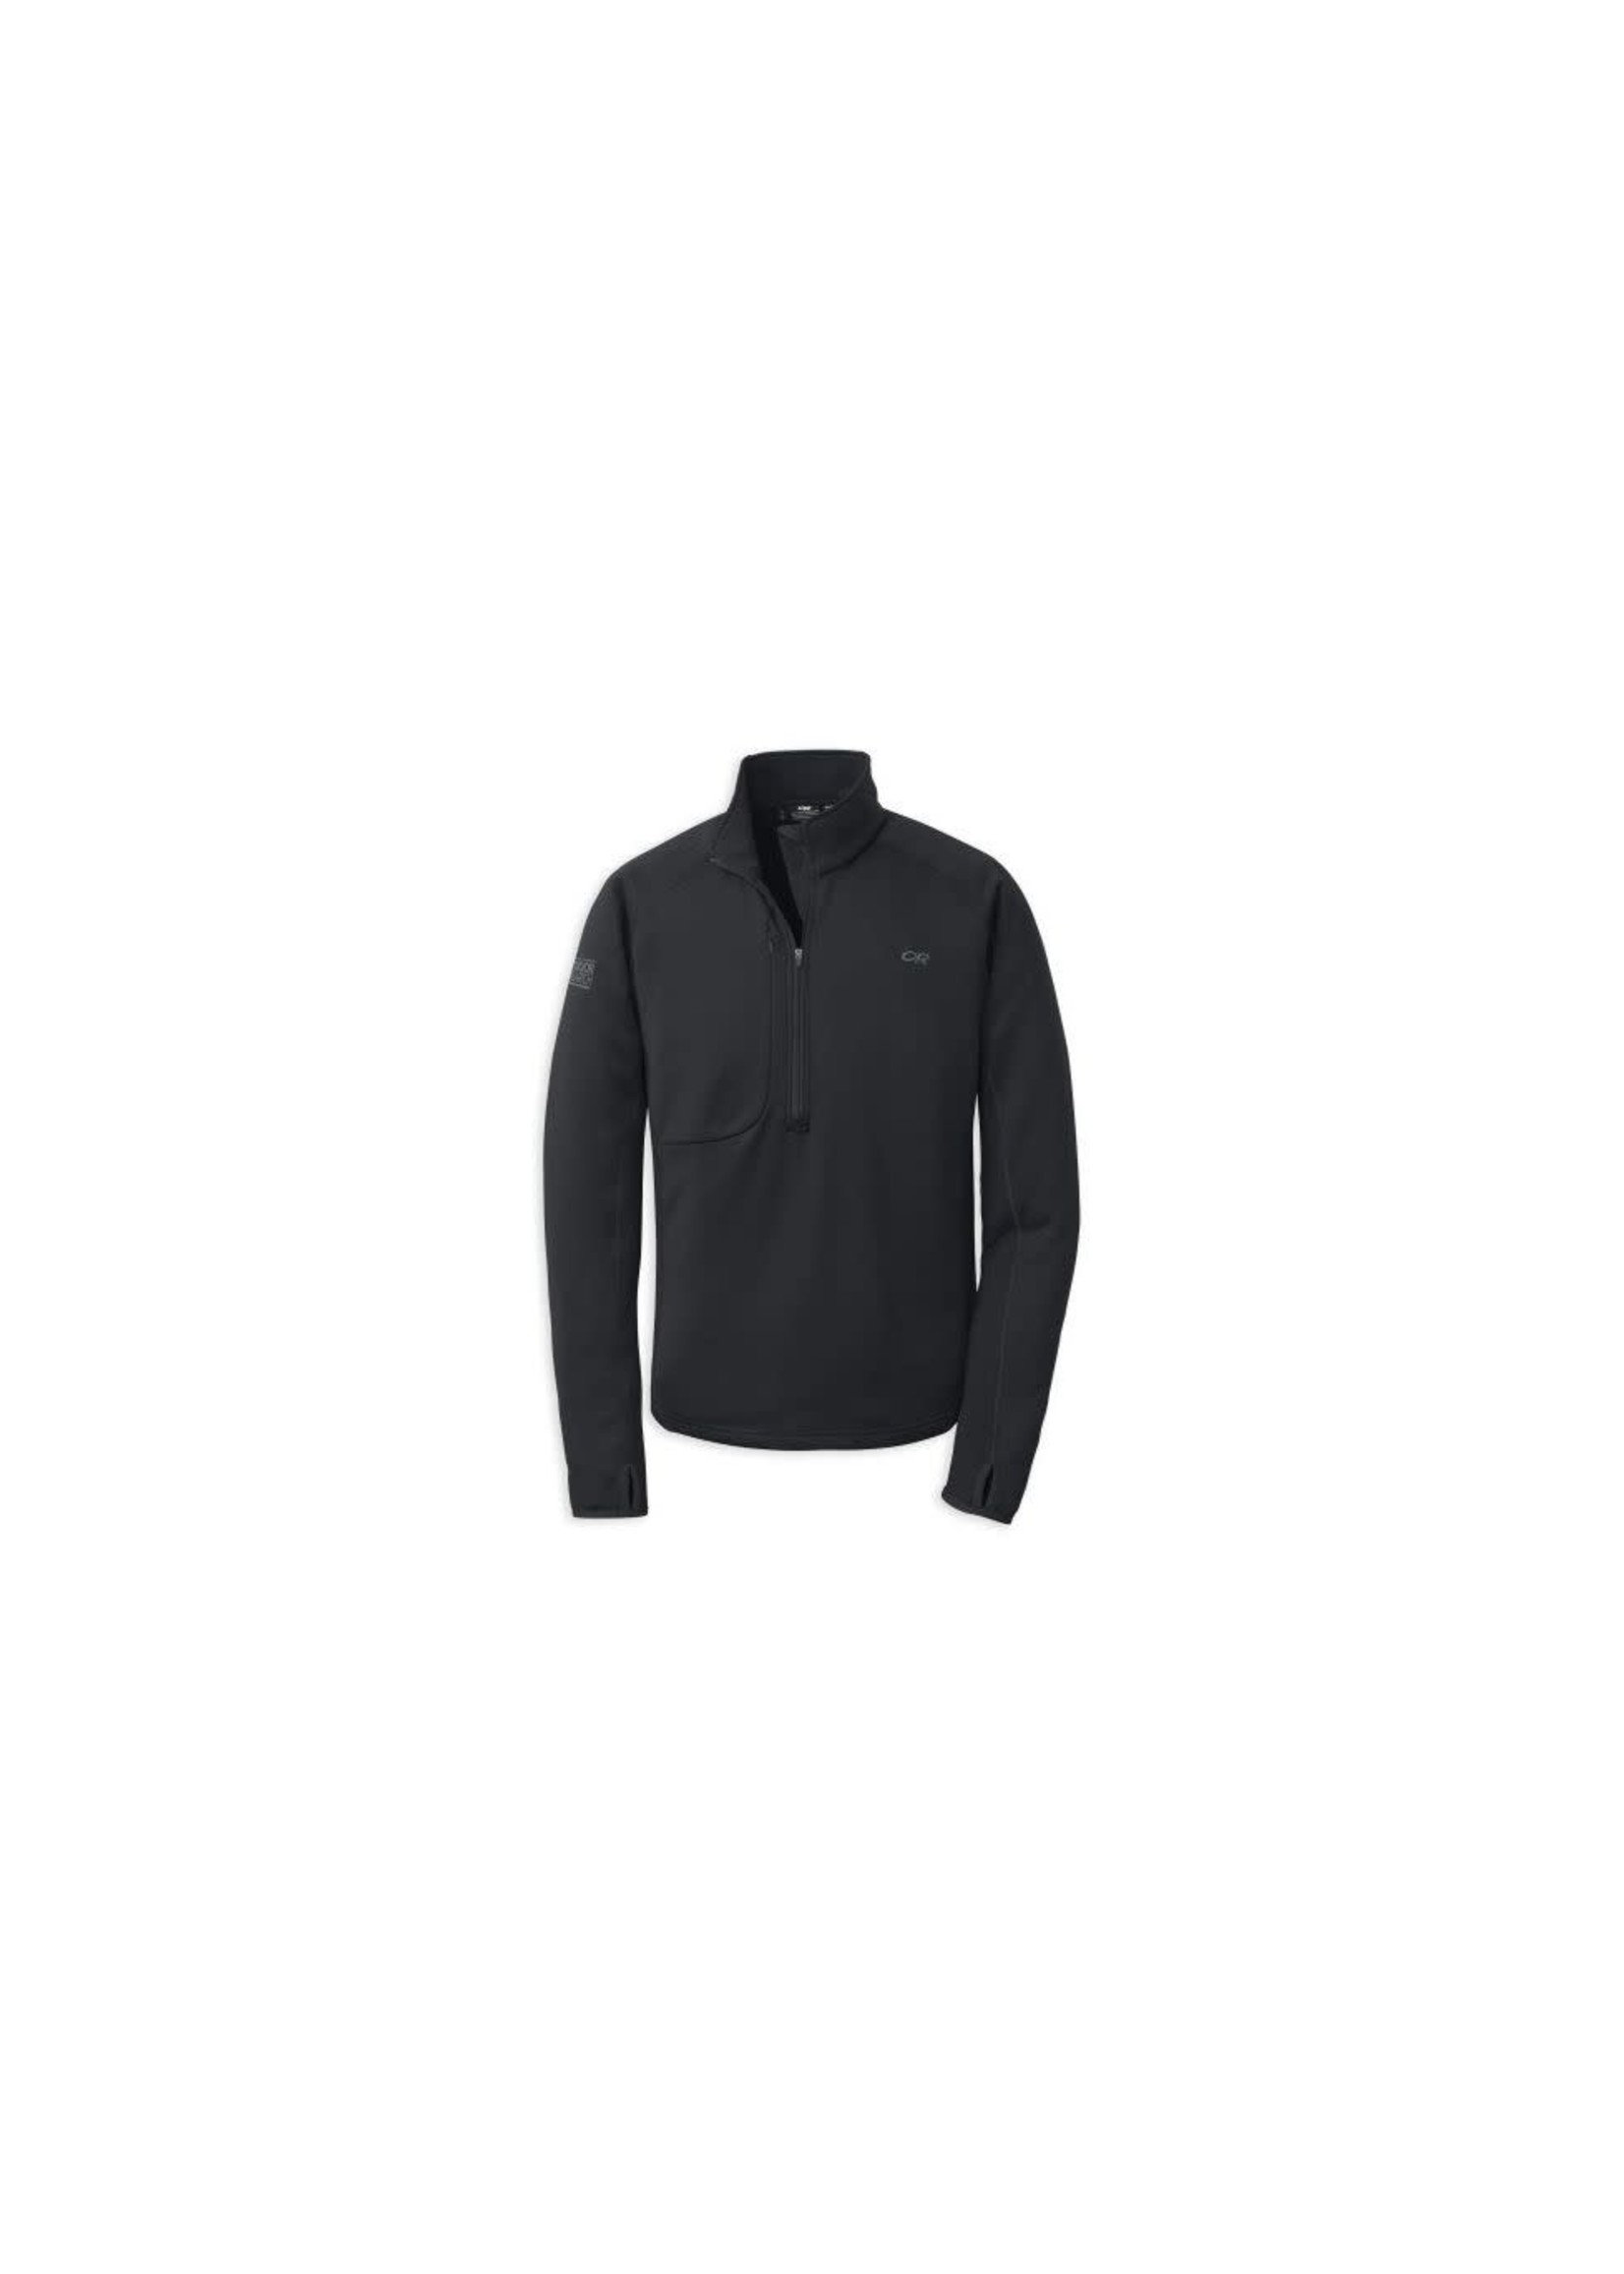 Outdoor Research Chandail Radiant Hybrid Pullover pour hommes Noir 2XL